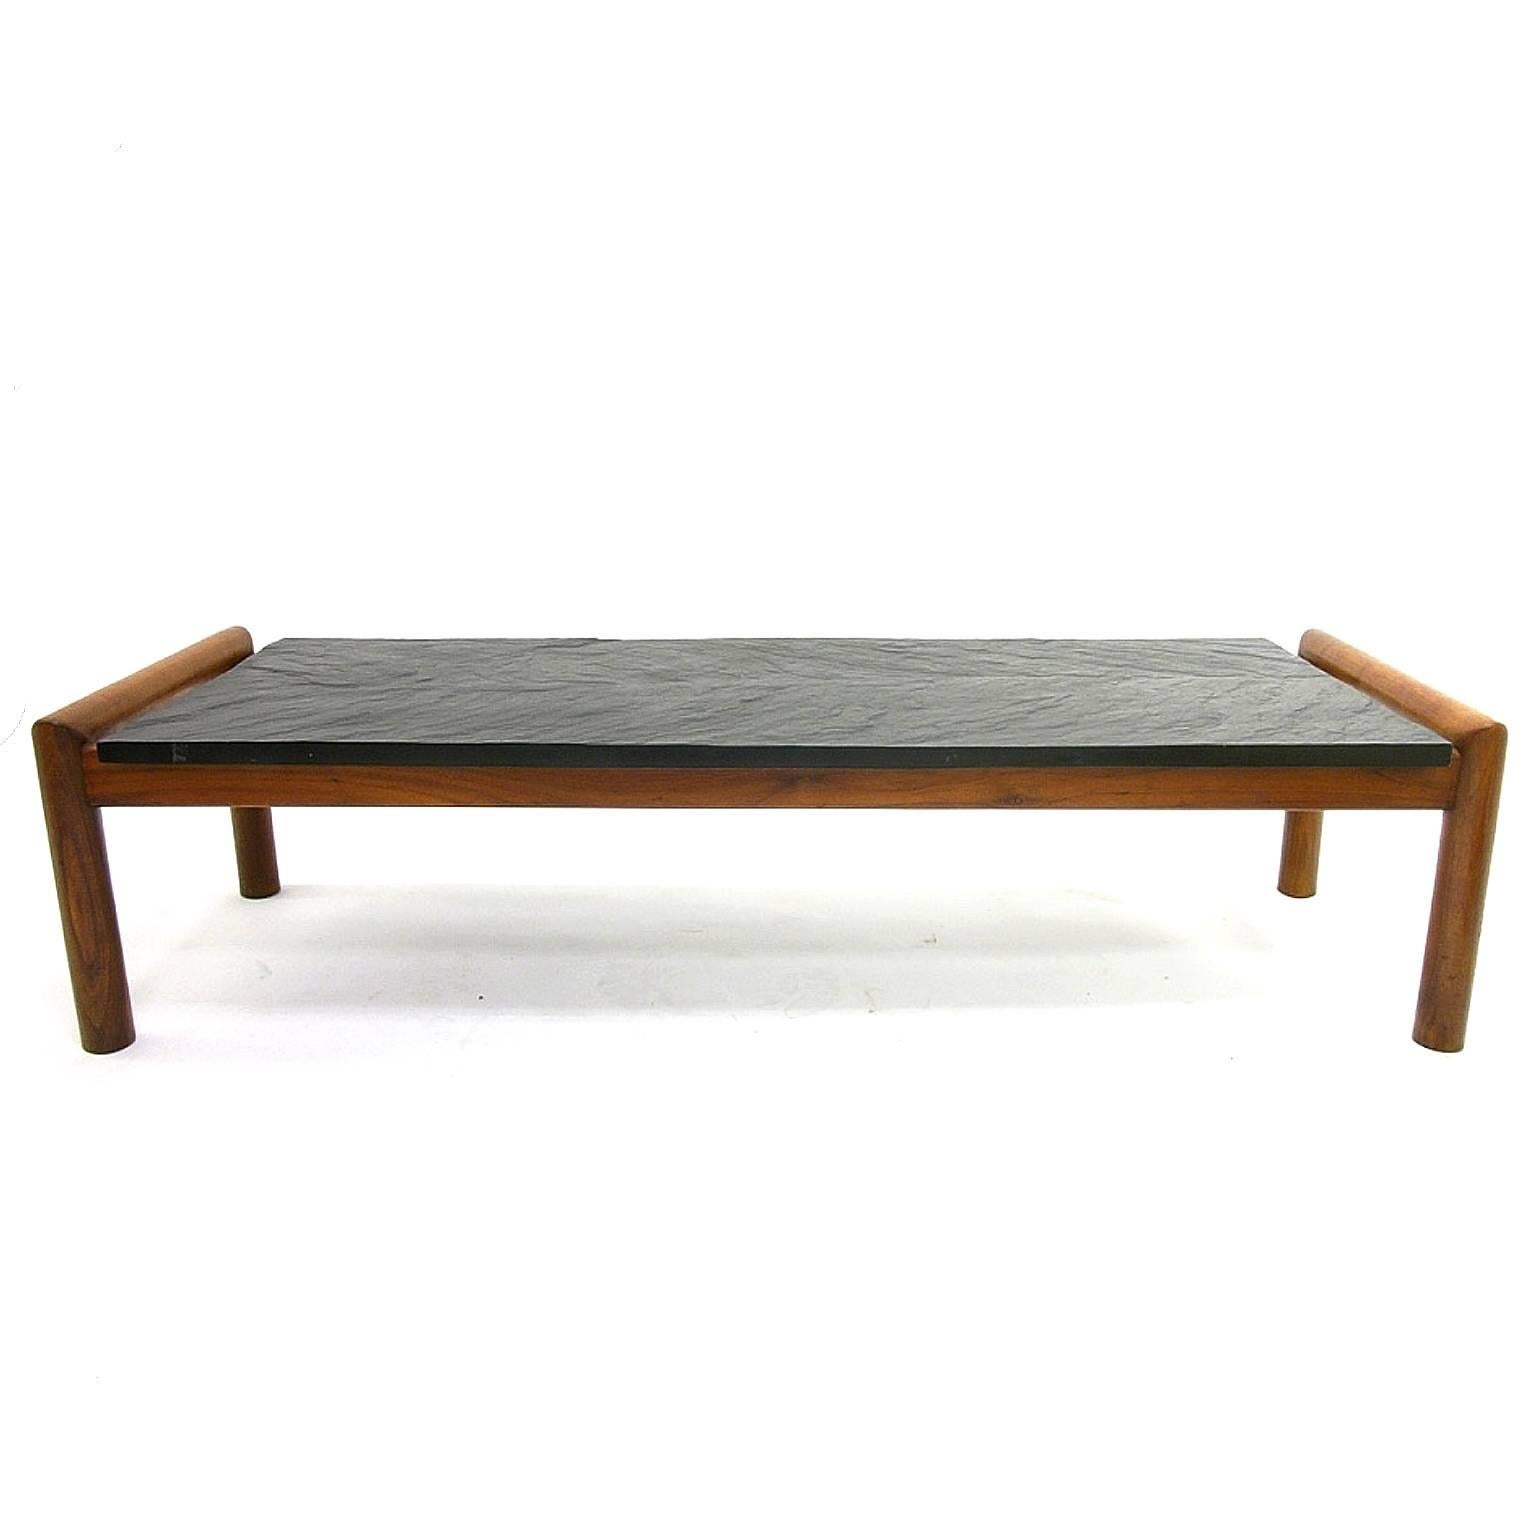 20th Century Mid-Century Modern Brutalist Slate and Walnut Coffee Table by Adrian Pearsall For Sale